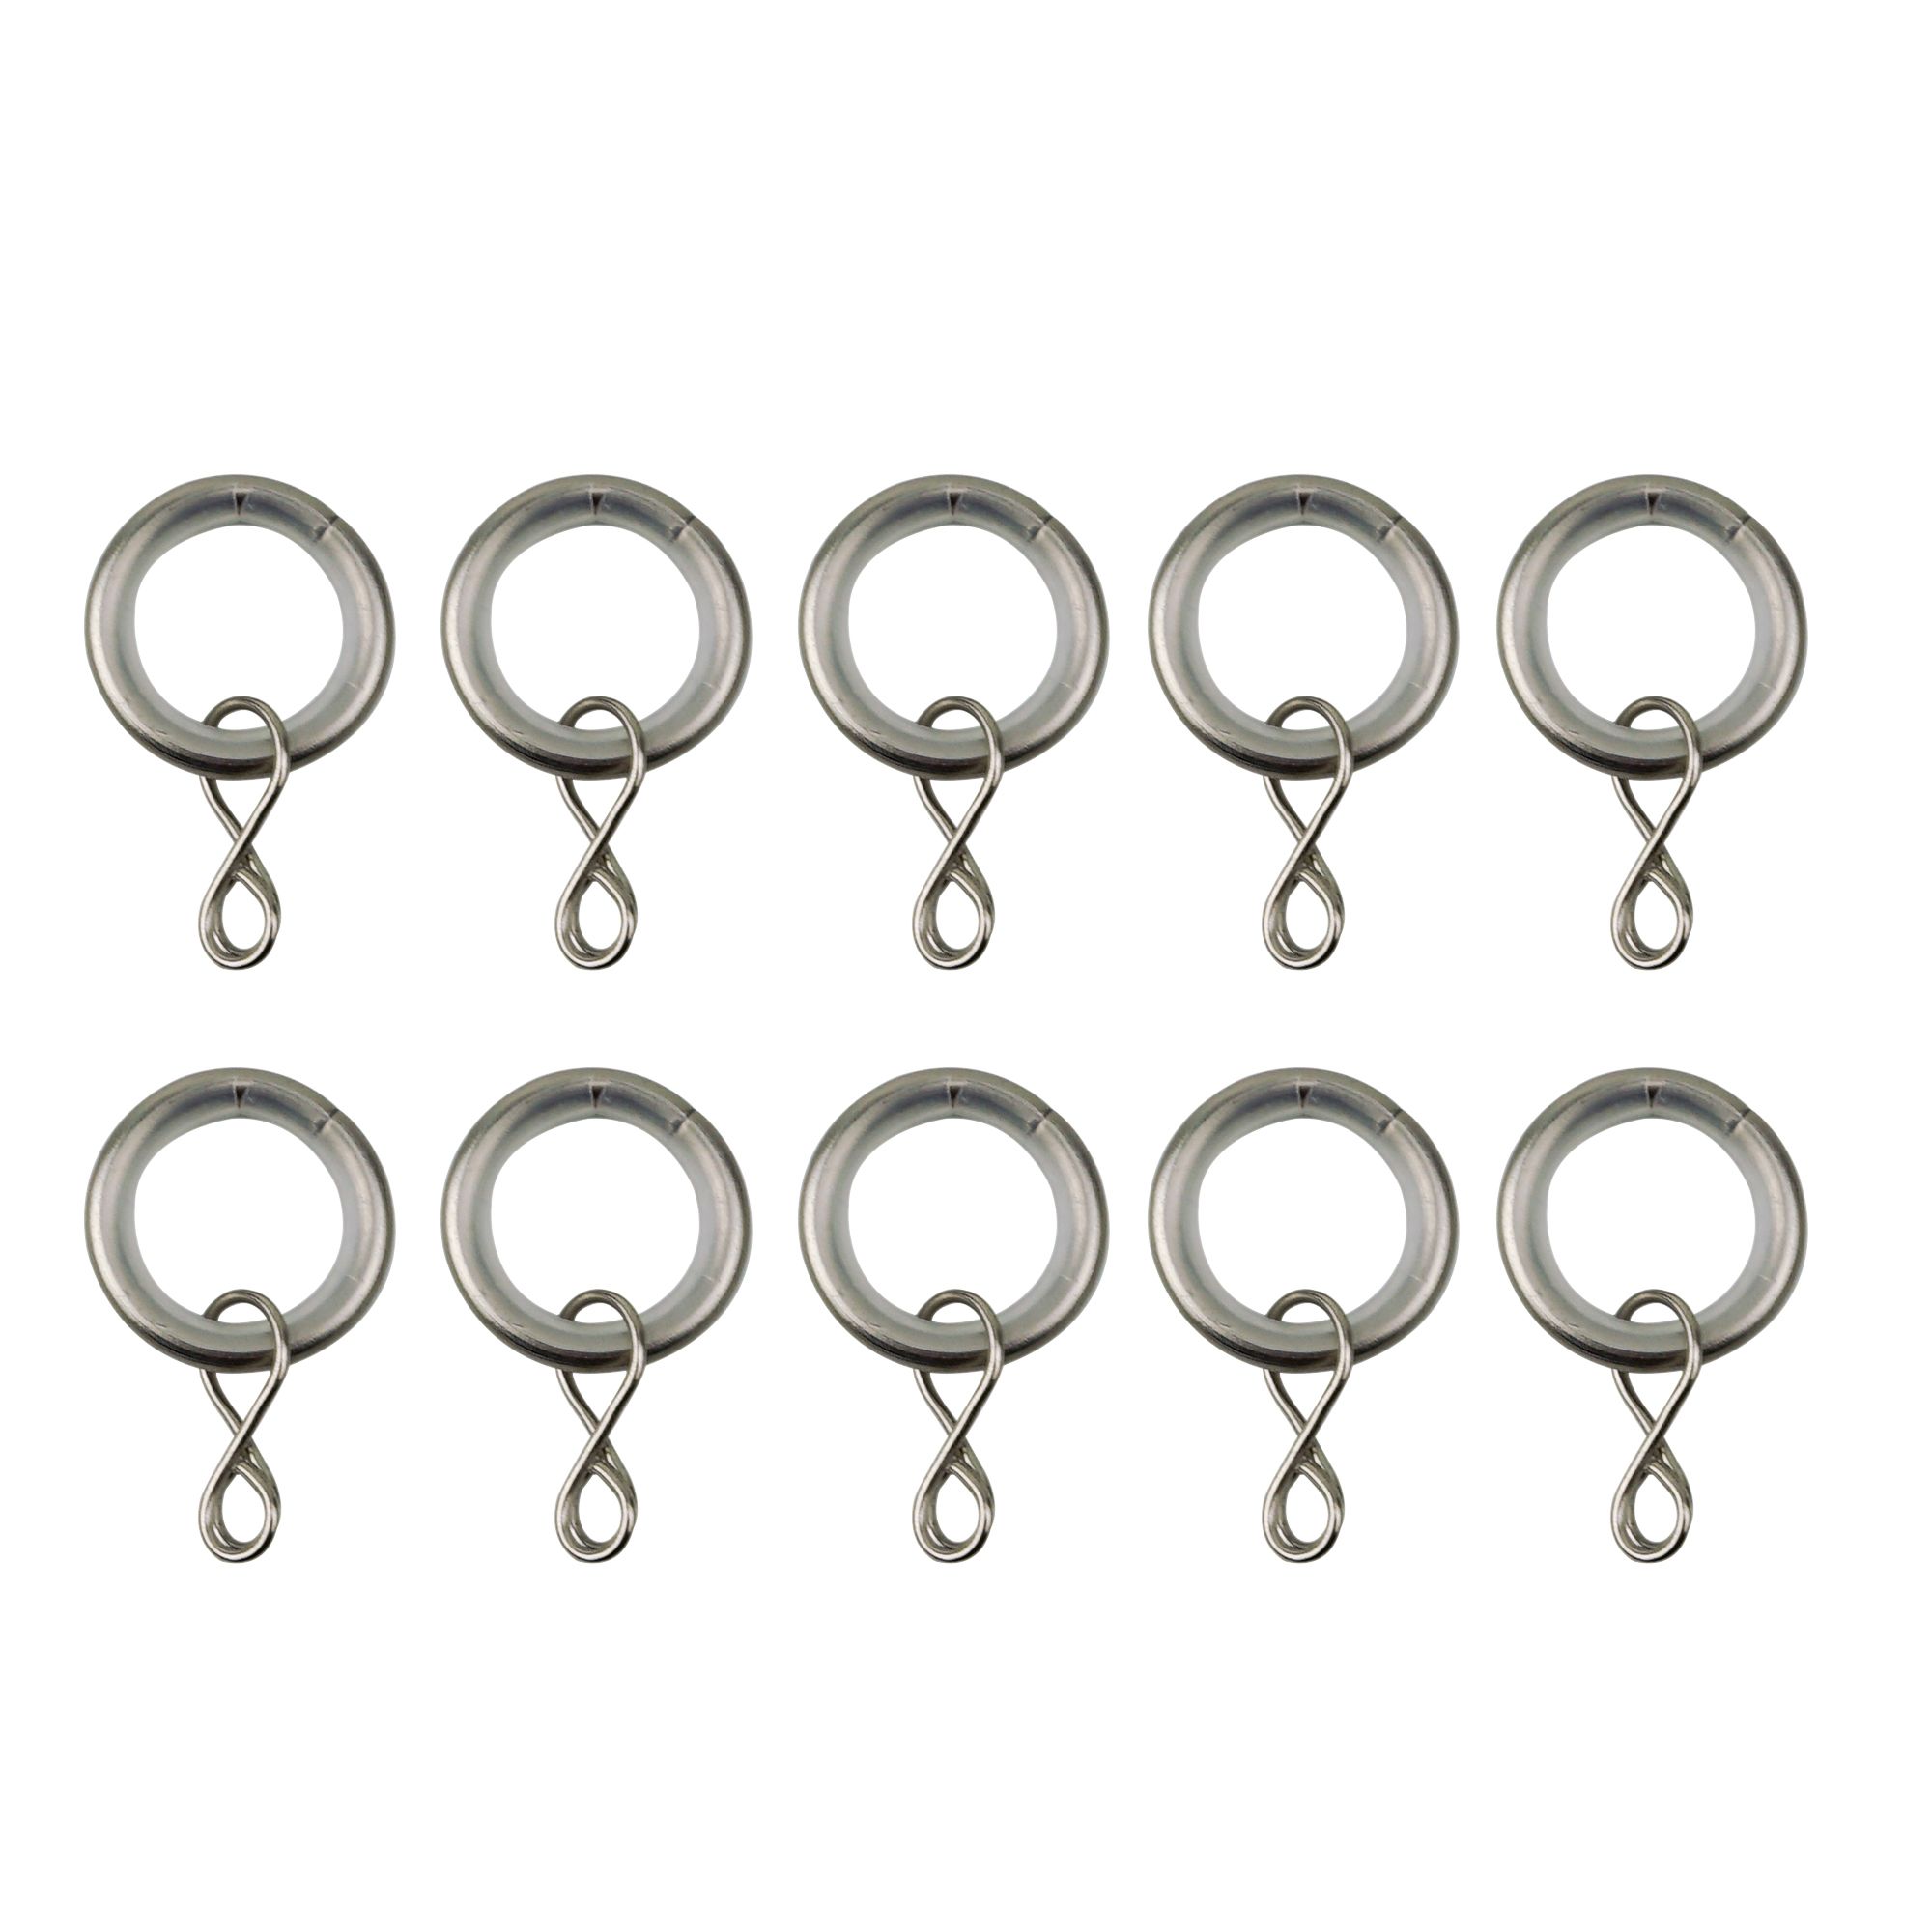 Curtain Ring made of Stainless Steel for Curtain Rods with 10mm Diameter.